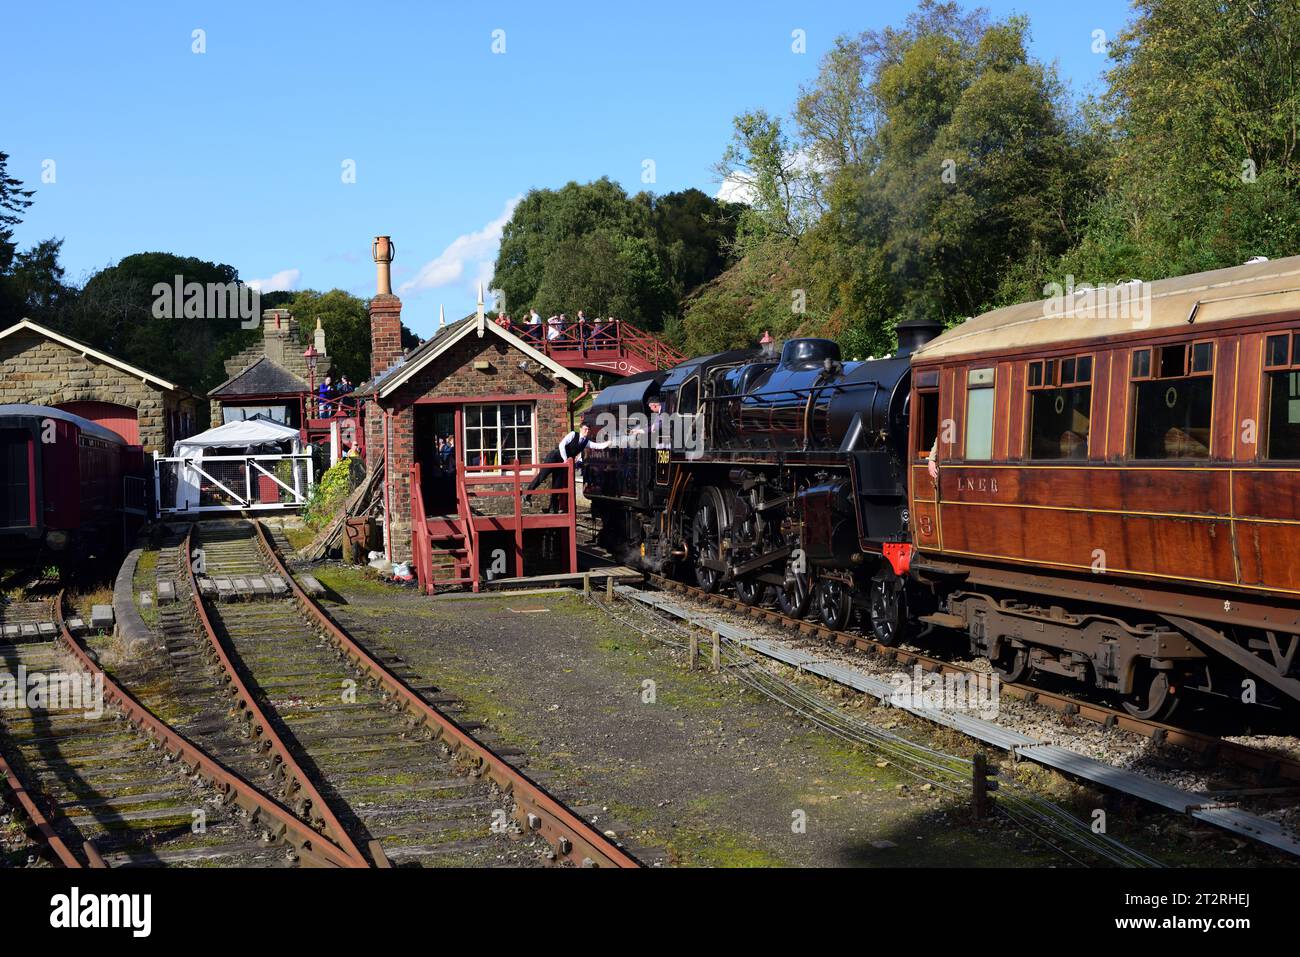 Running tender first, BR Standard Class 4 No 75069 arrives at Goathland on the North Yorkshire Moors Railway during its 50th anniversary gala. Stock Photo